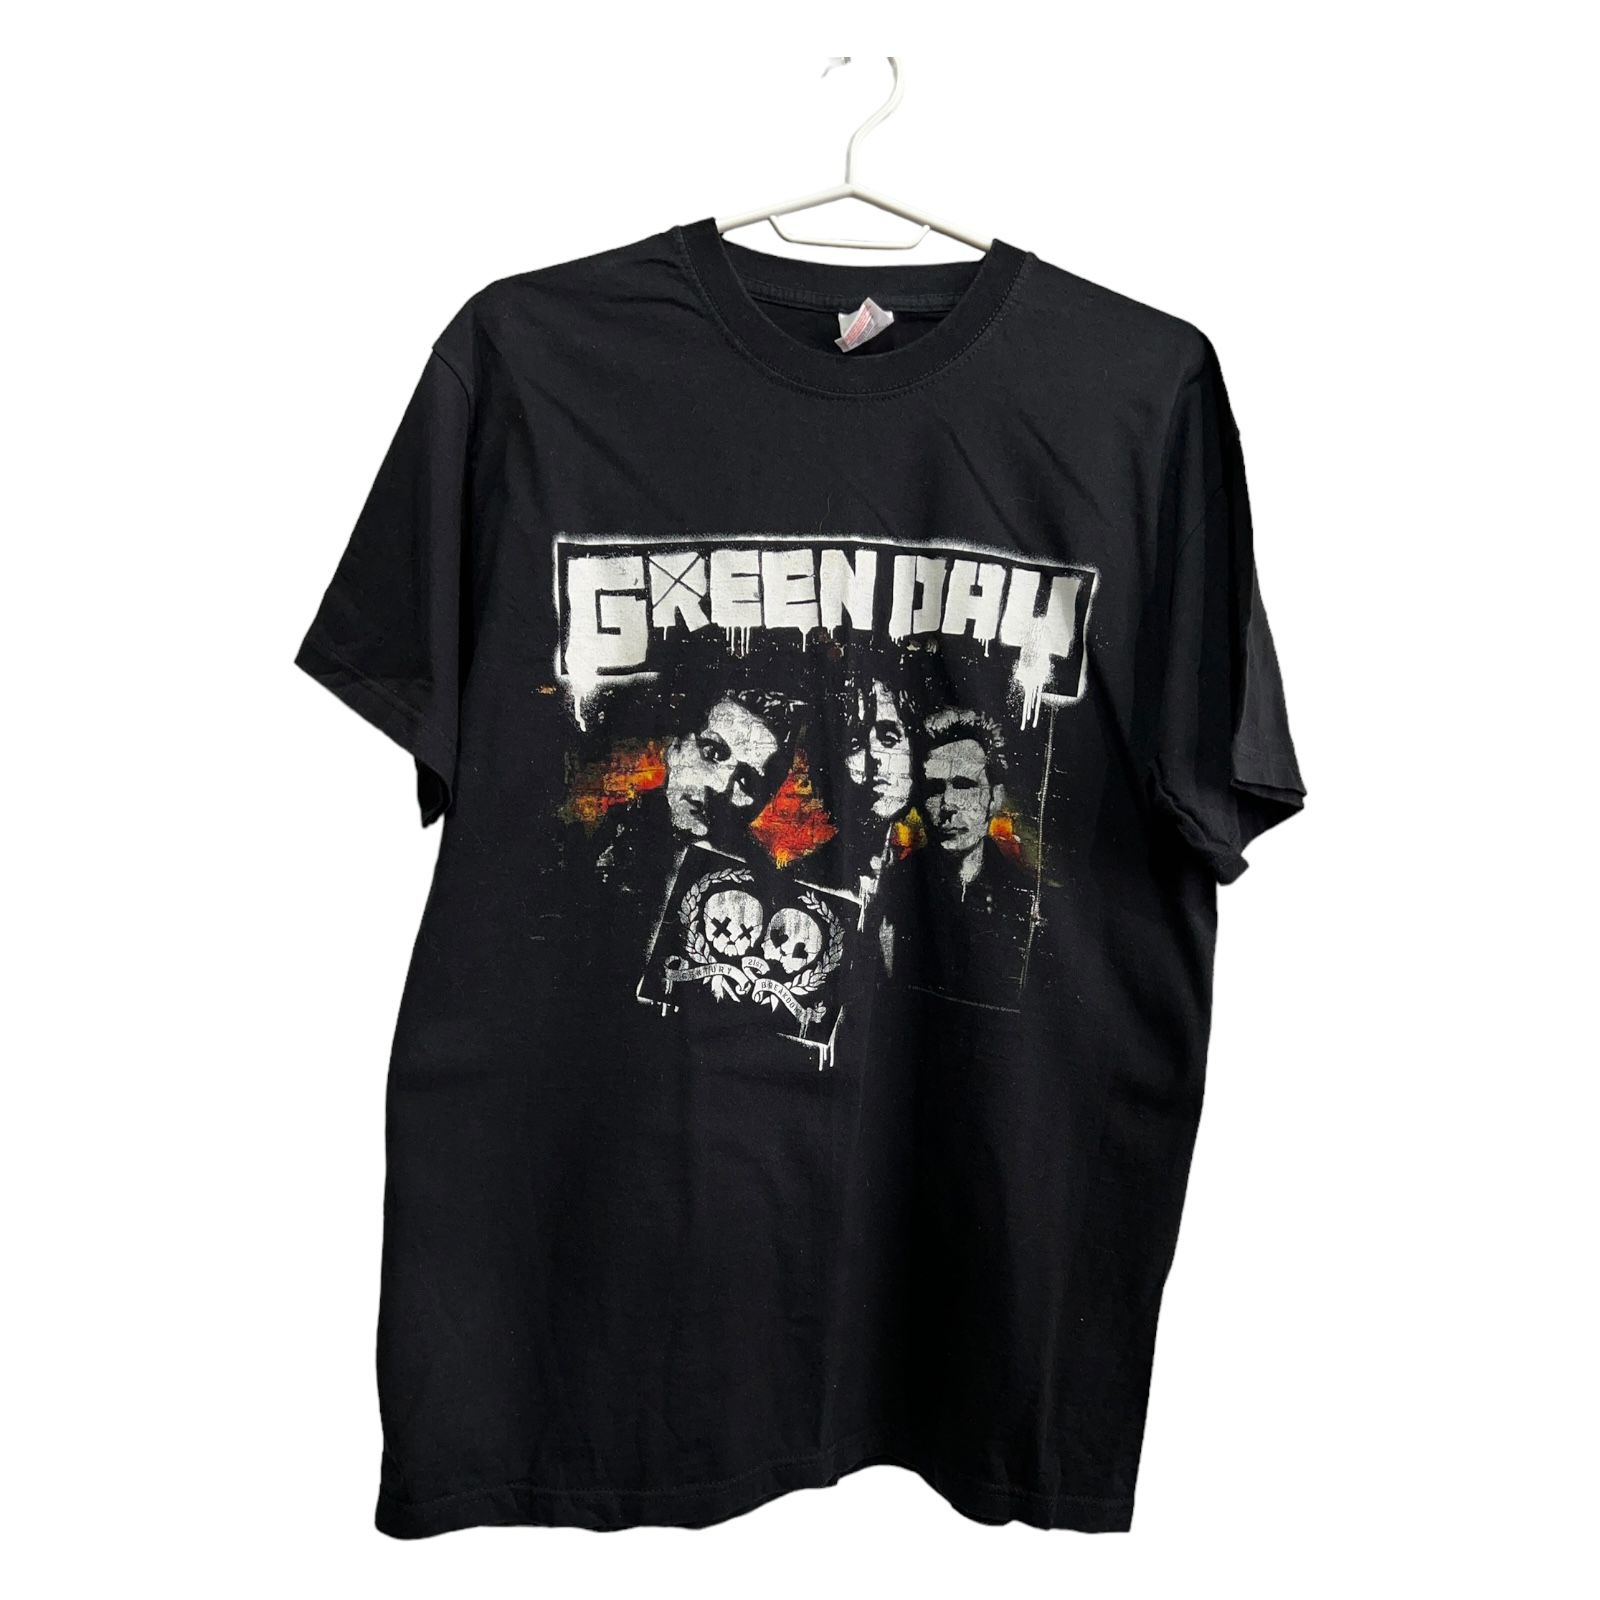 Pre-owned Band Tees X Rock Tees Vintage Green Day 2009 T Shirt Size M In Black